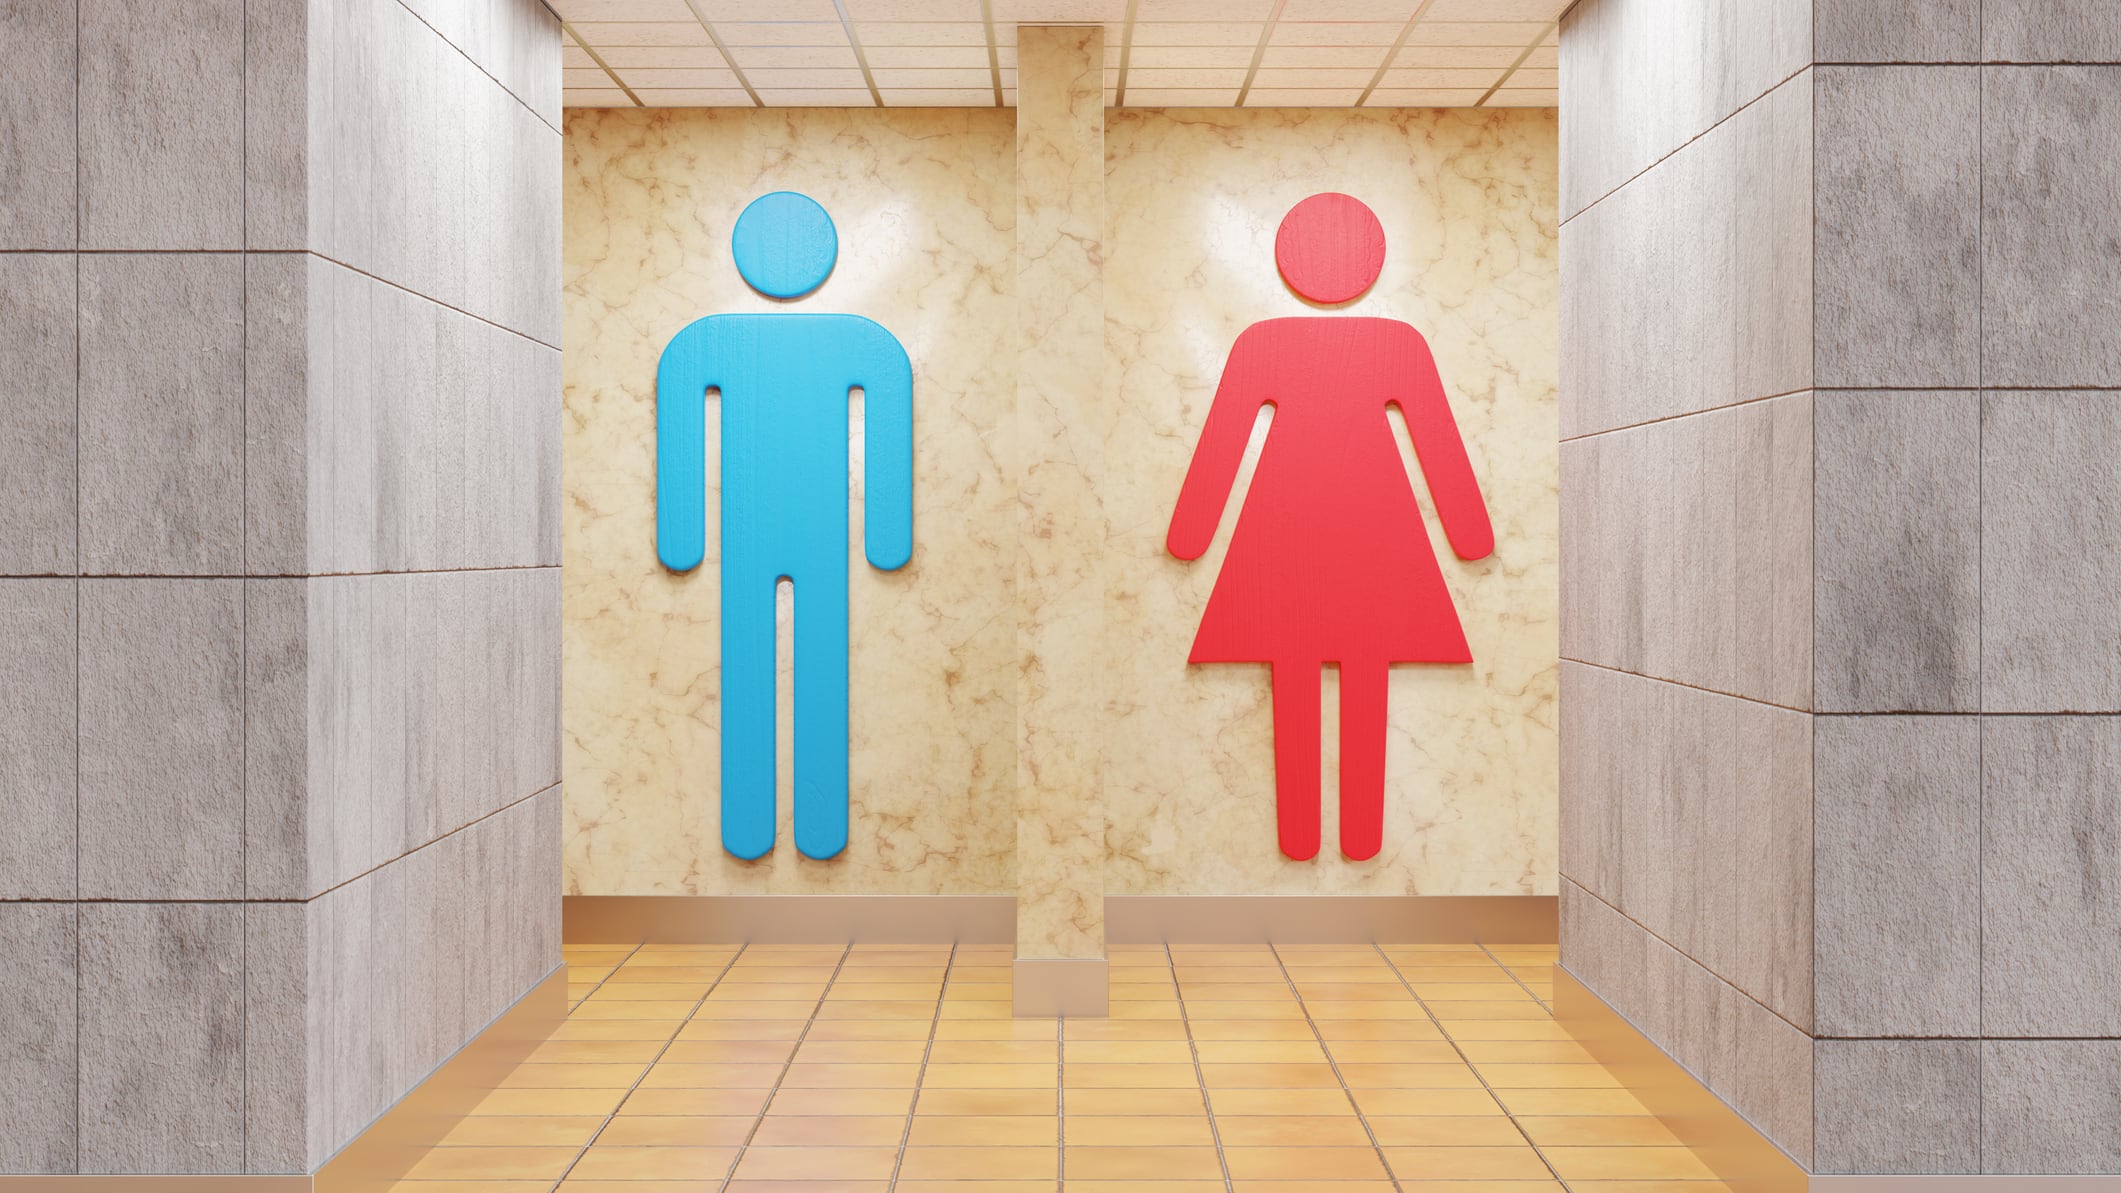 Entrance of a toilet divided into male and female sections by gender icons. Illustration of the concept of legal requirements for toilets in workplaces and public areas